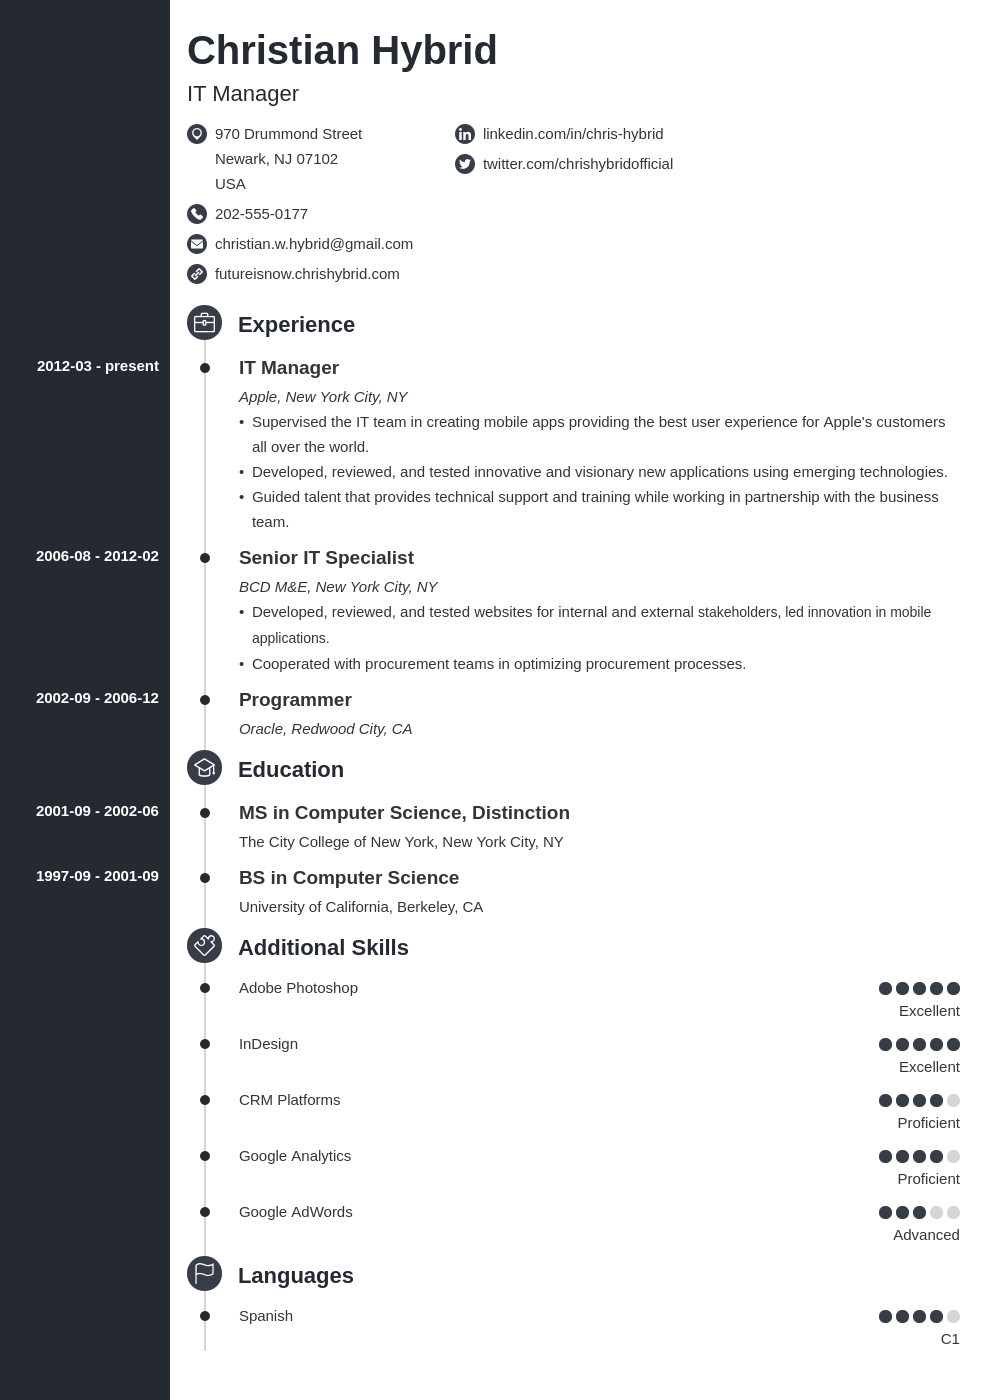 creative writer combination resume template free download